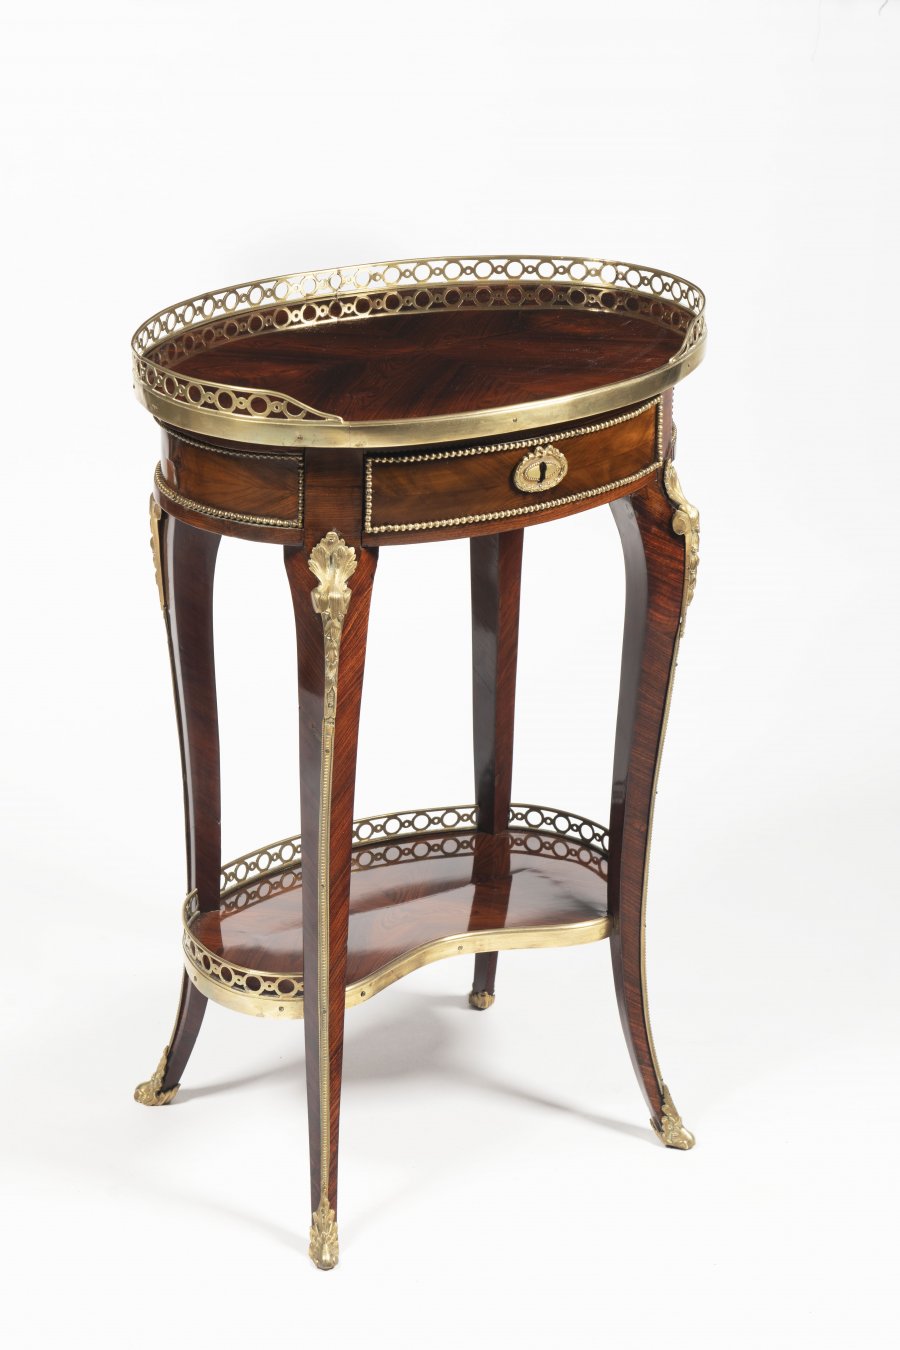 A LOUIS XVI. STYLE SIDE TABLE